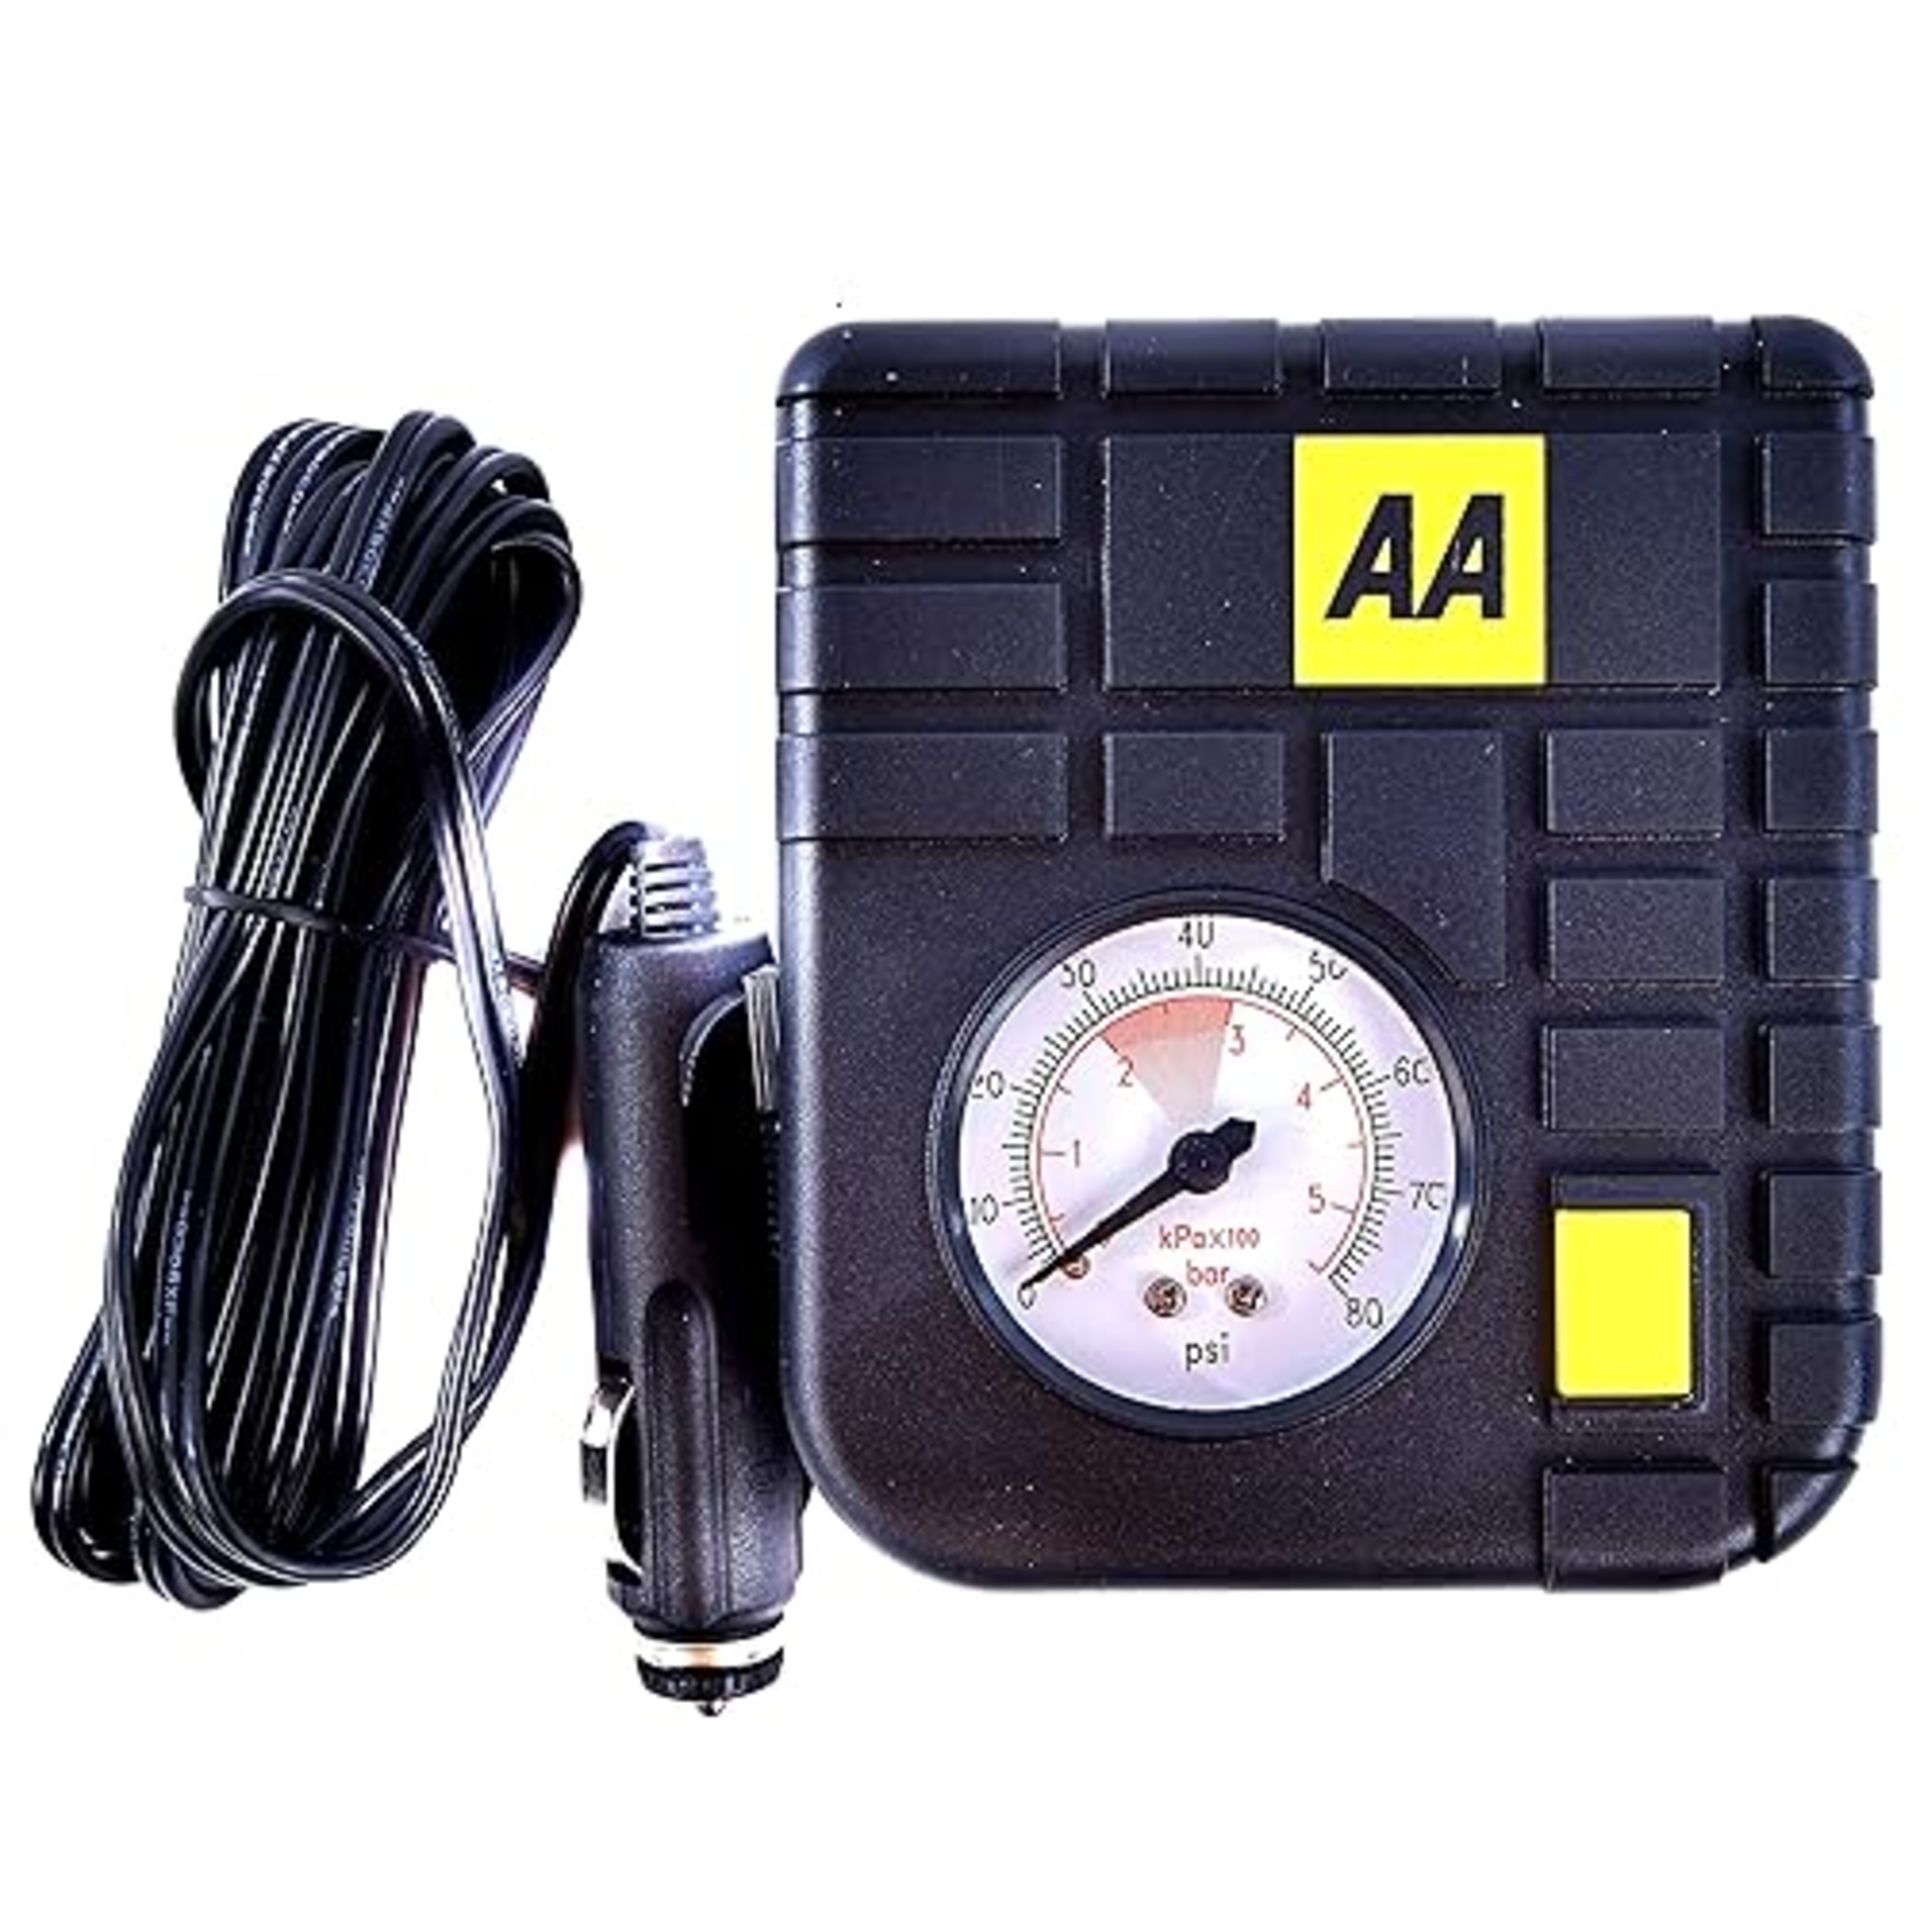 AA Car Essentials 12V Compact Tyre Inflator AA5007 â€“ For Cars Vans Motorbikes Vehicles Infla